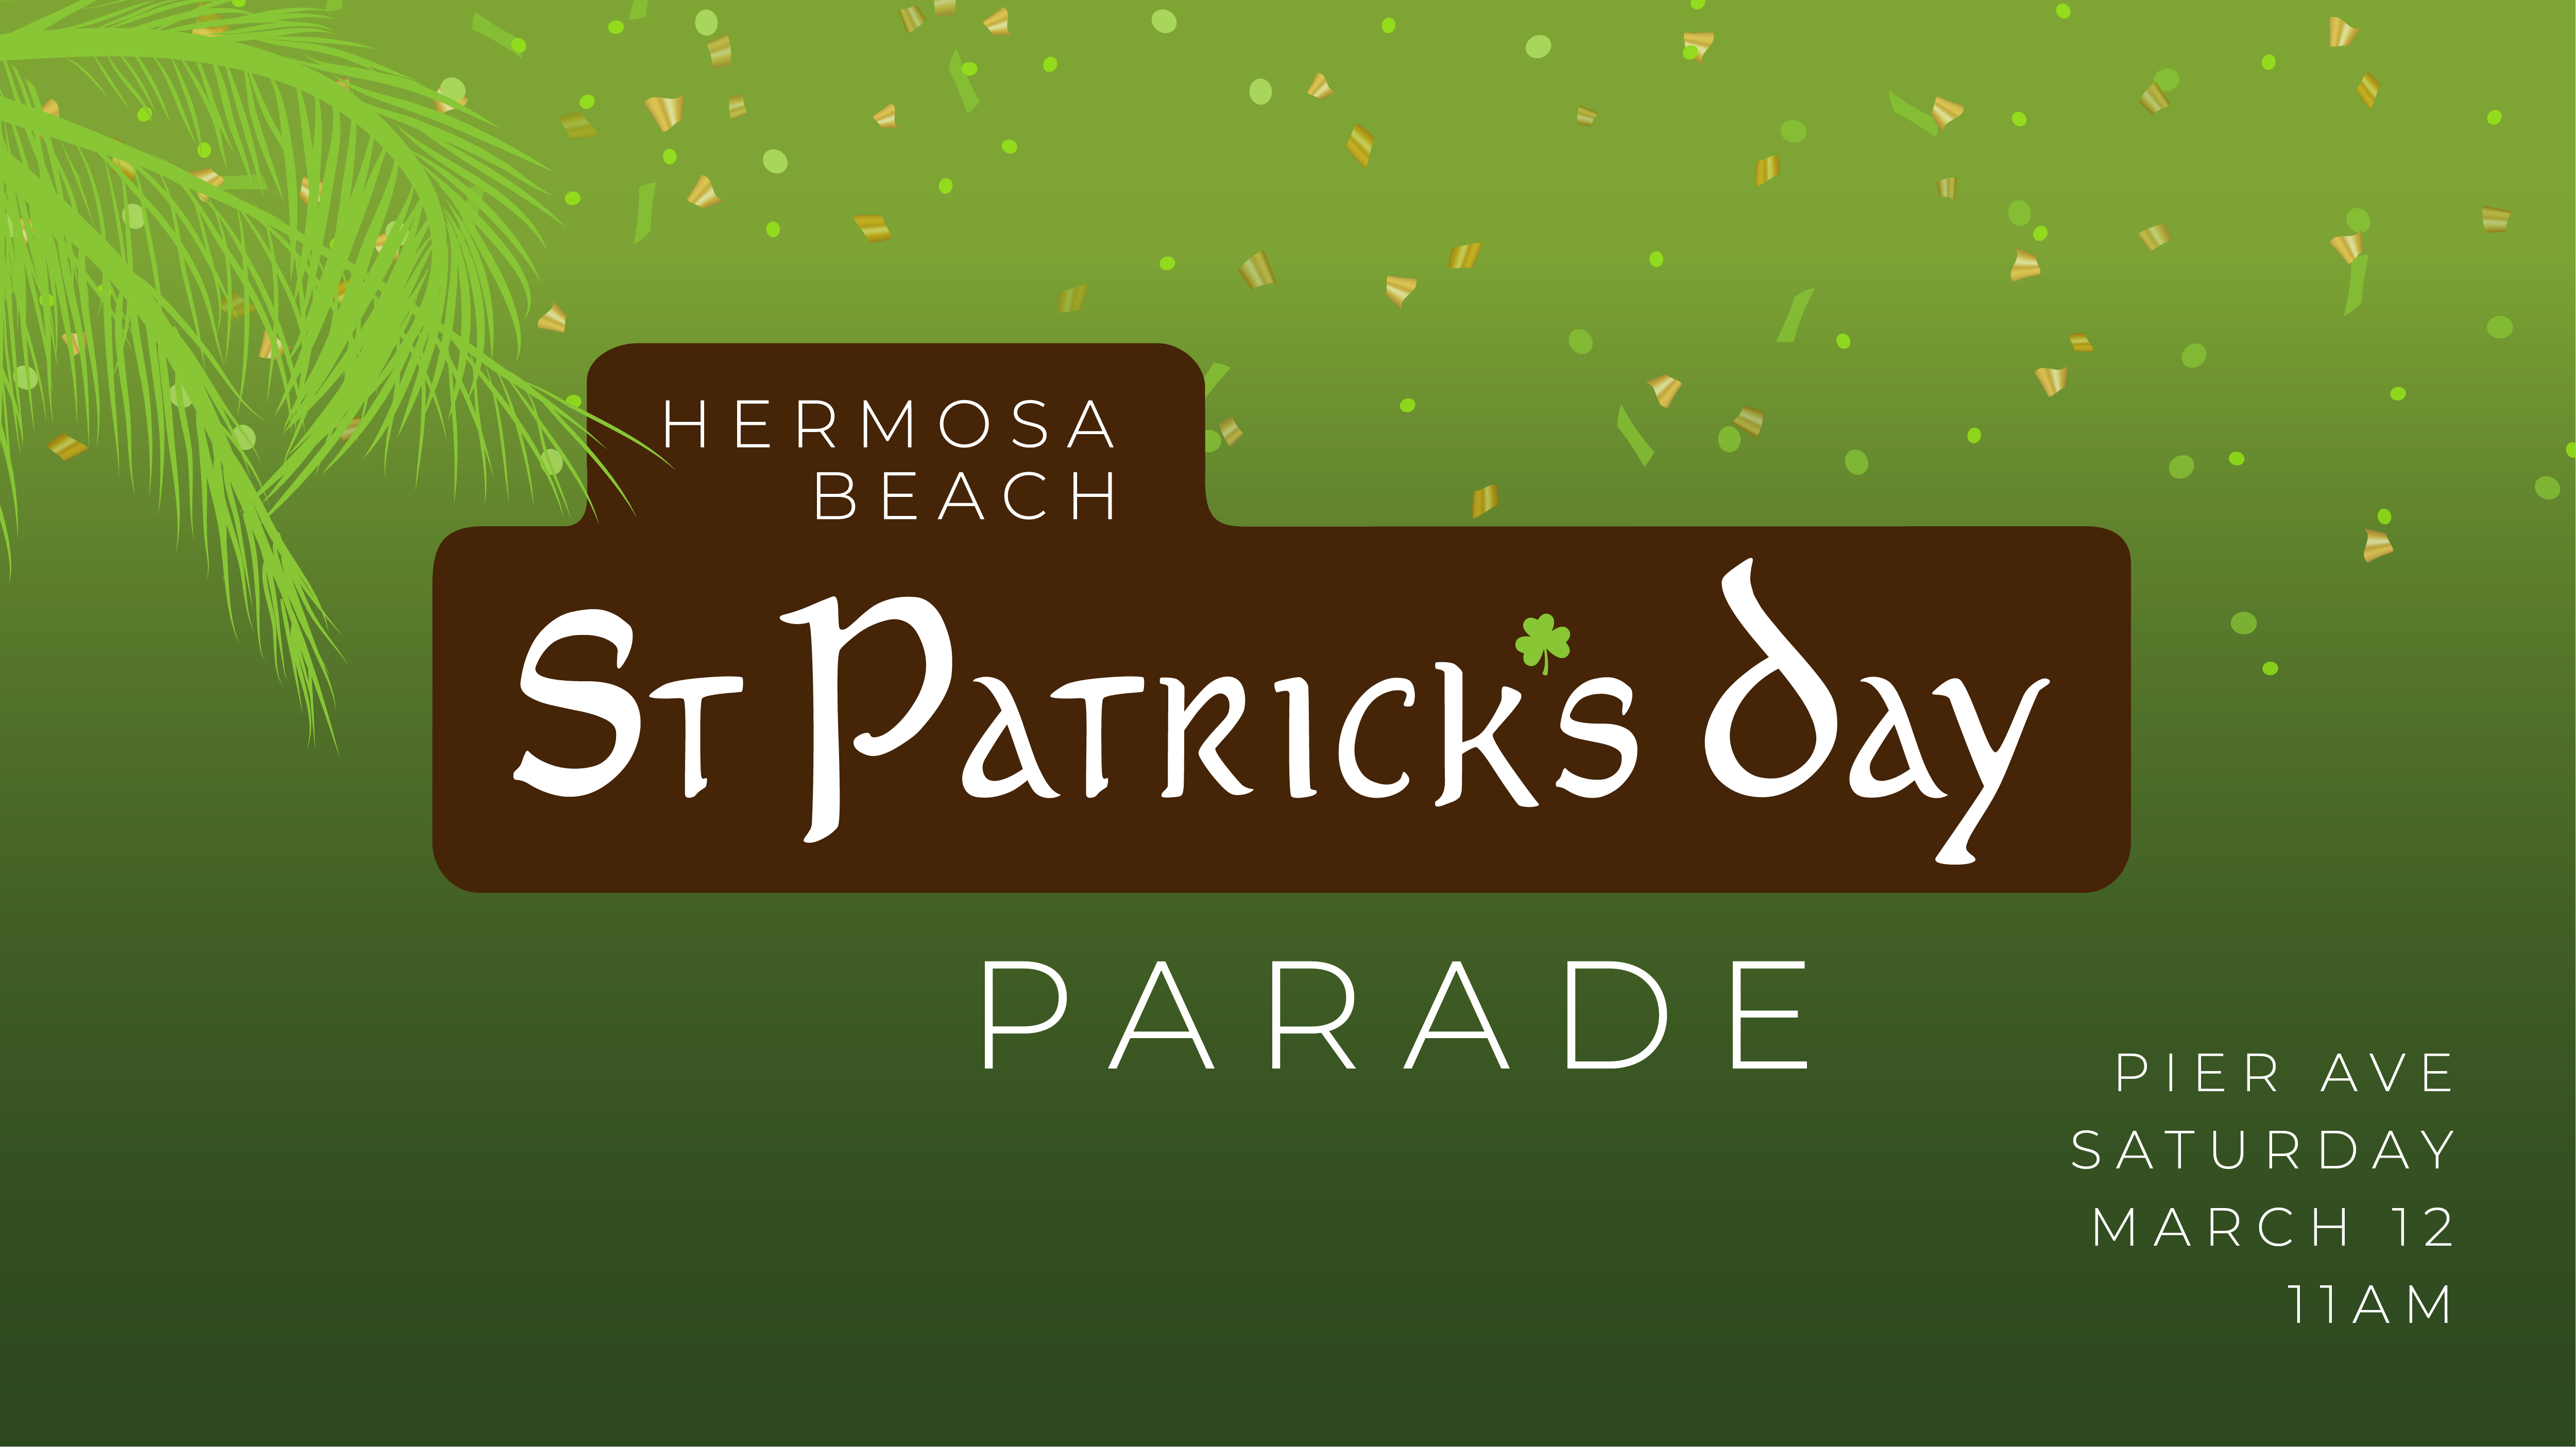 Hermosa Beach St. Patrick's Day Parade logo with date and time.